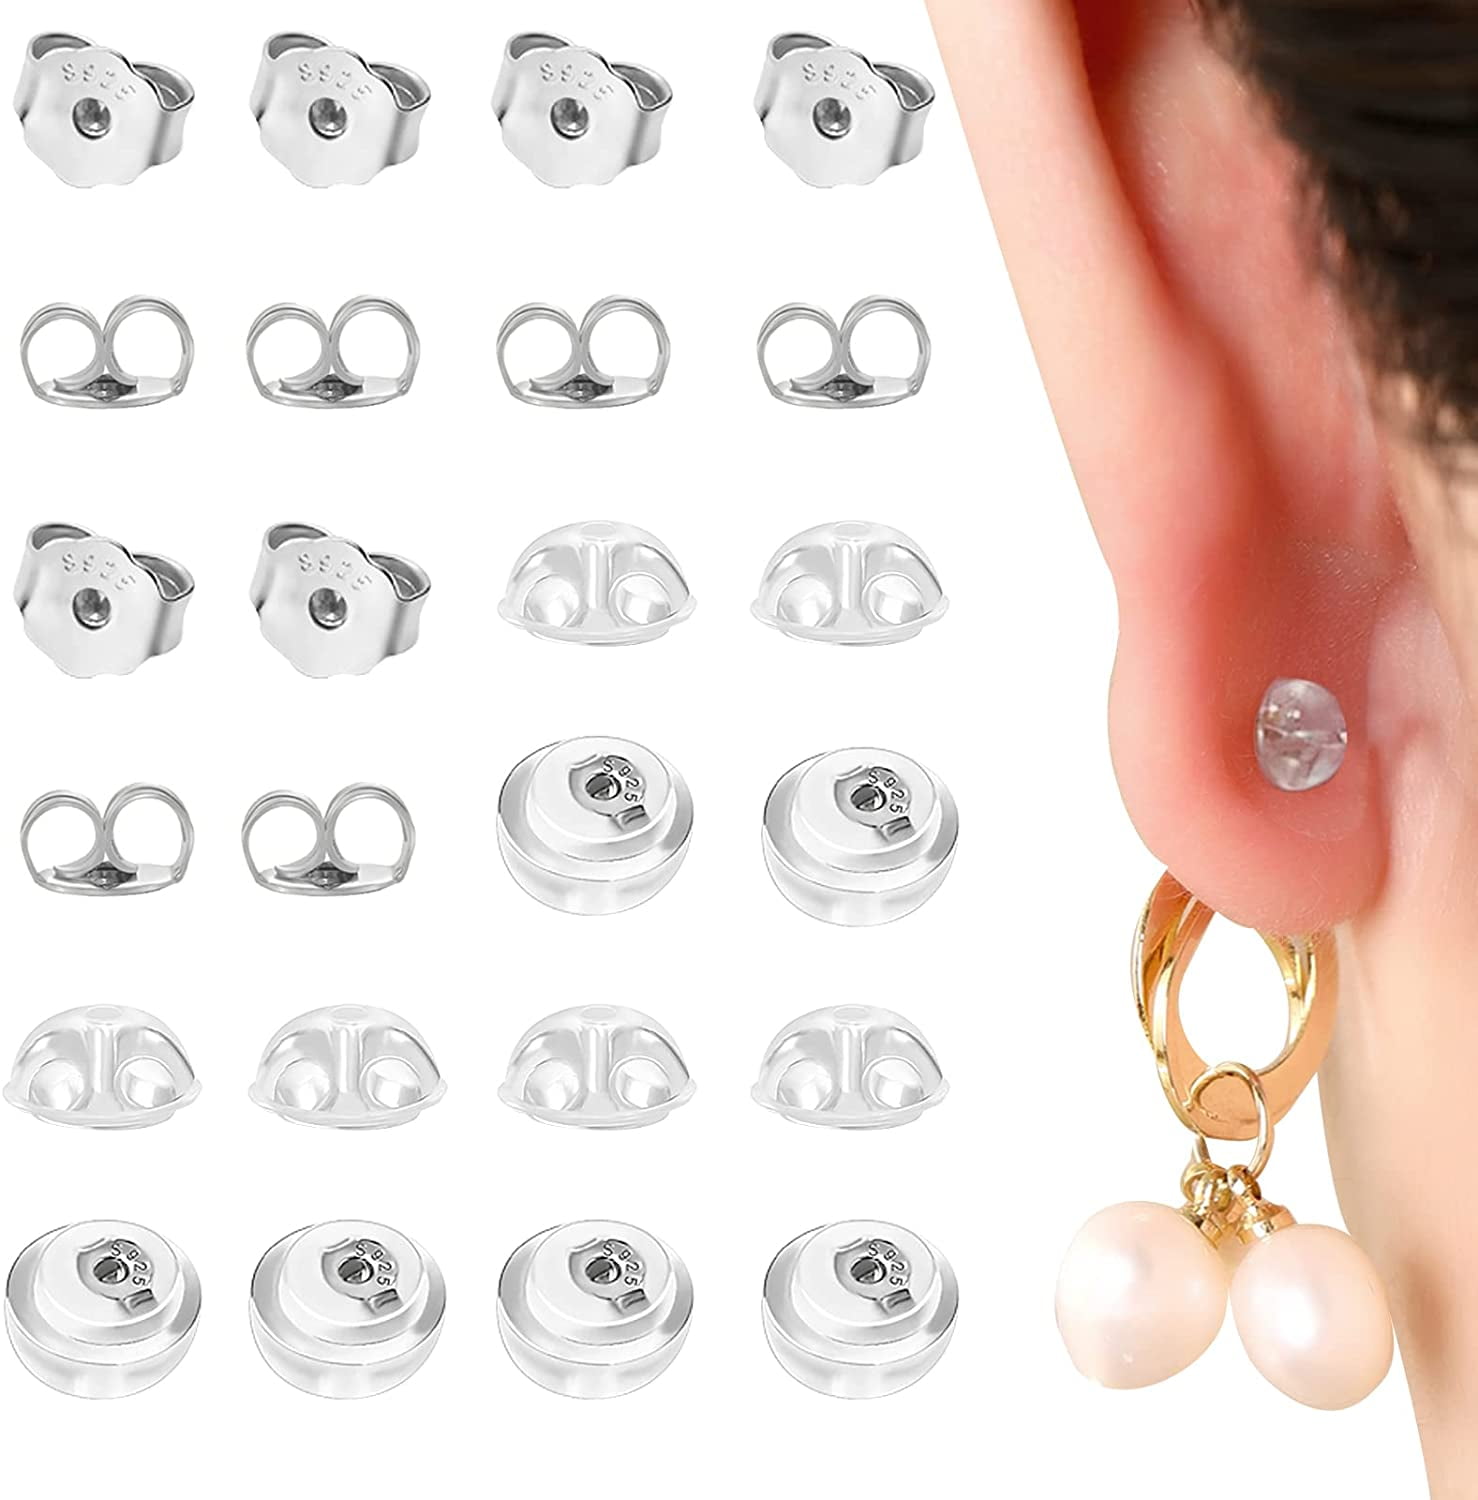 14k Yellow Gold and Silicone Earring Back Replacement Secure and